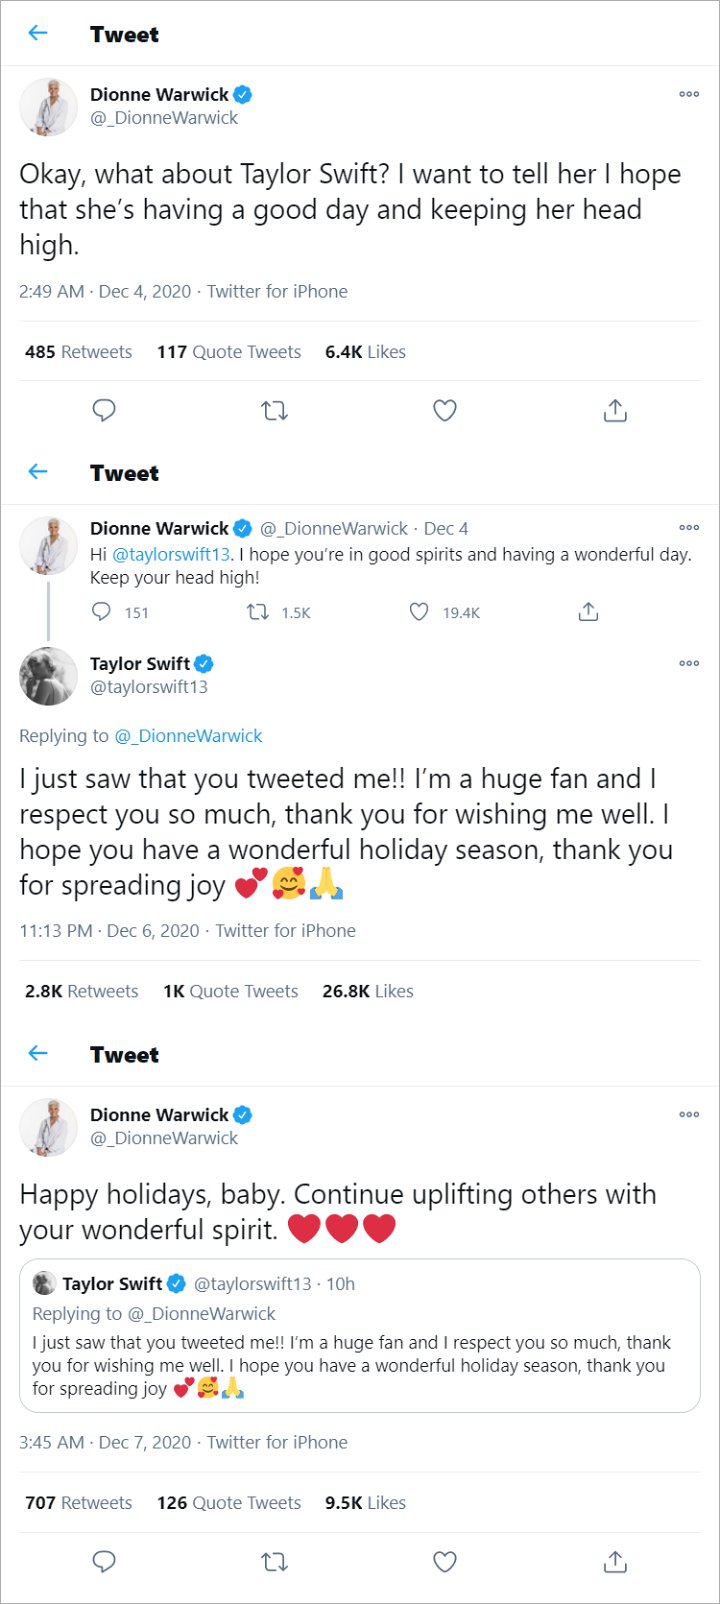 Taylor Swift and Dionne Warwick's Tweets